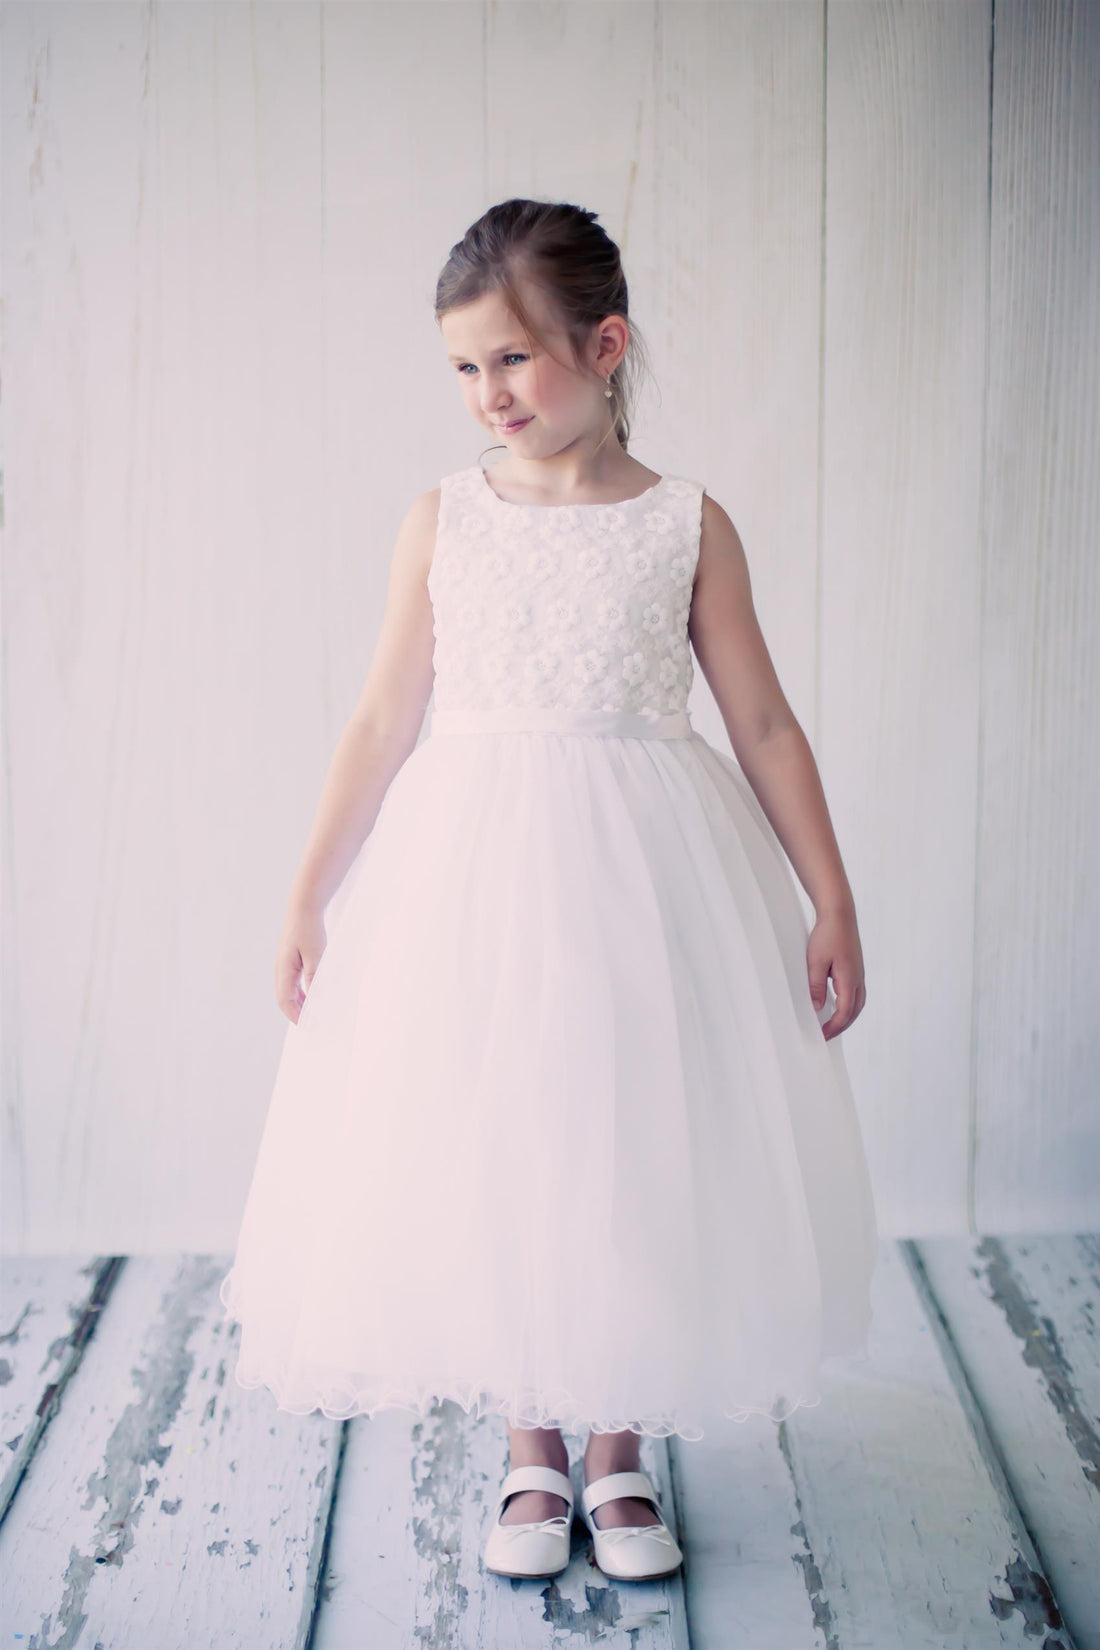 Communion Dress Trends: Choosing the Dress Without Compromising Style